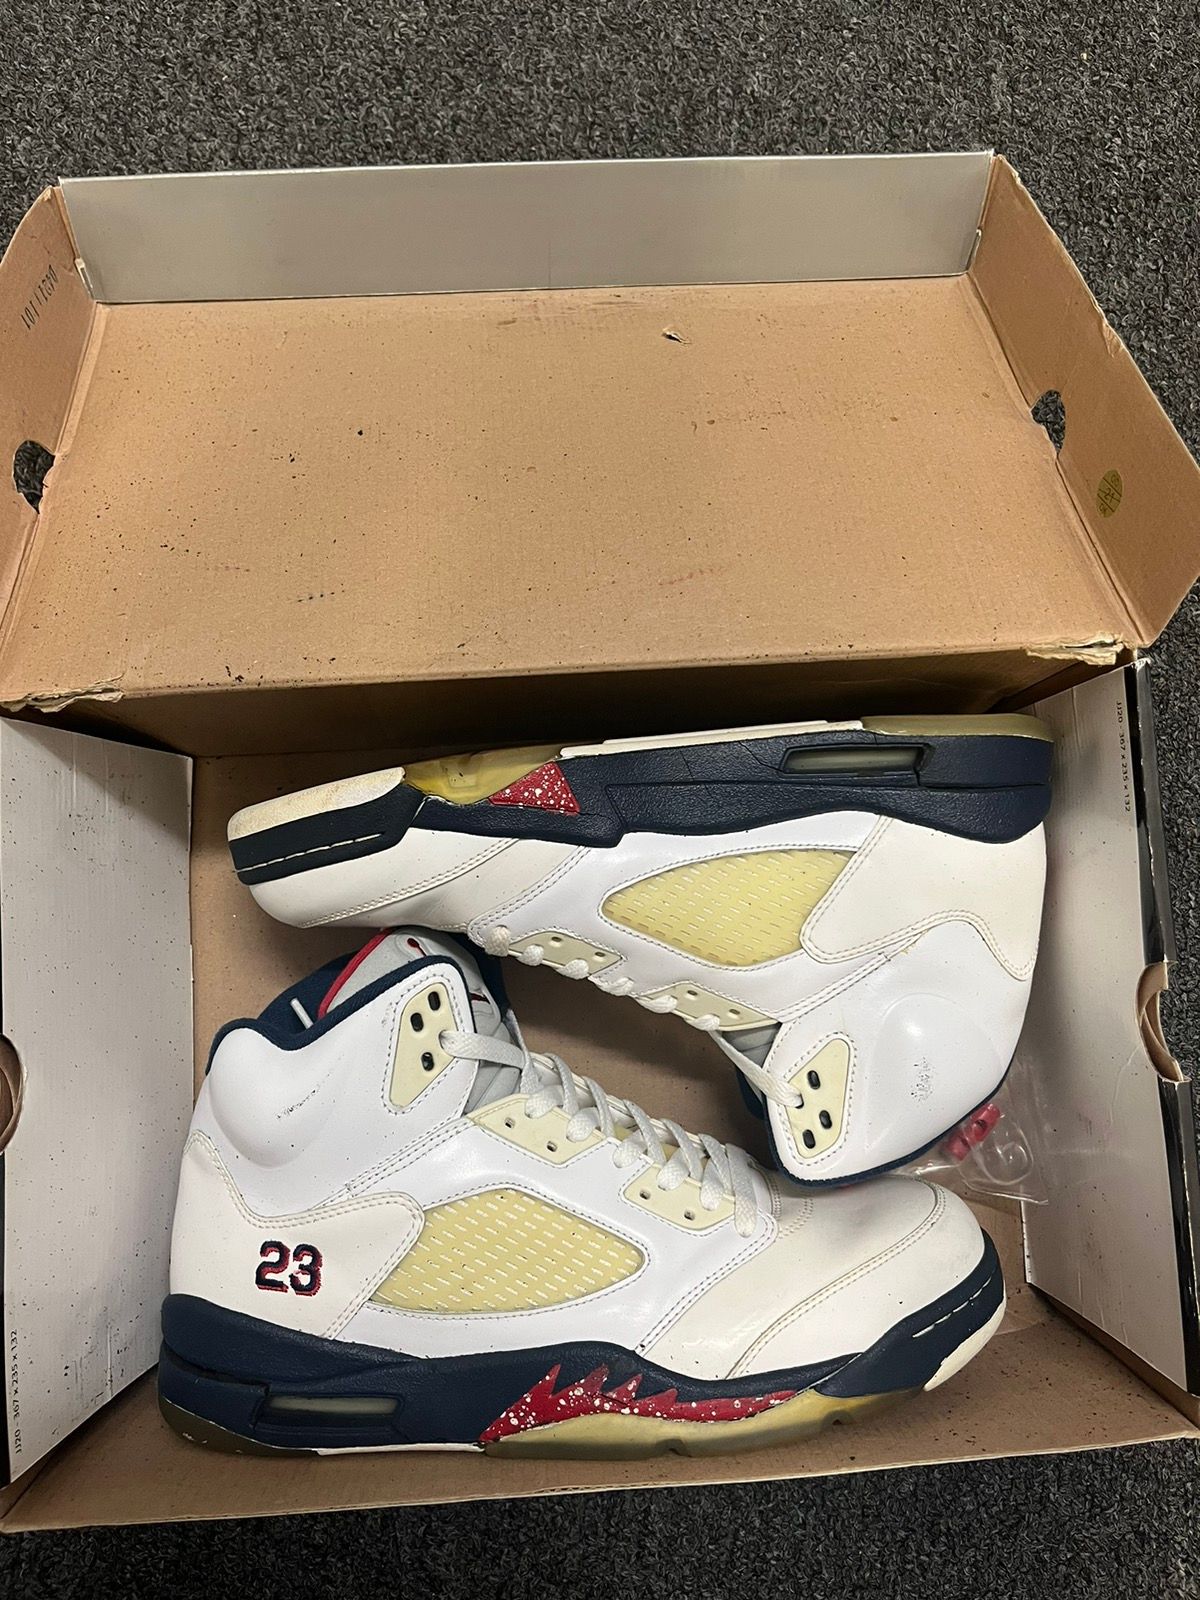 Pre-owned Jordan Brand 5 Olympic Shoes In Blue